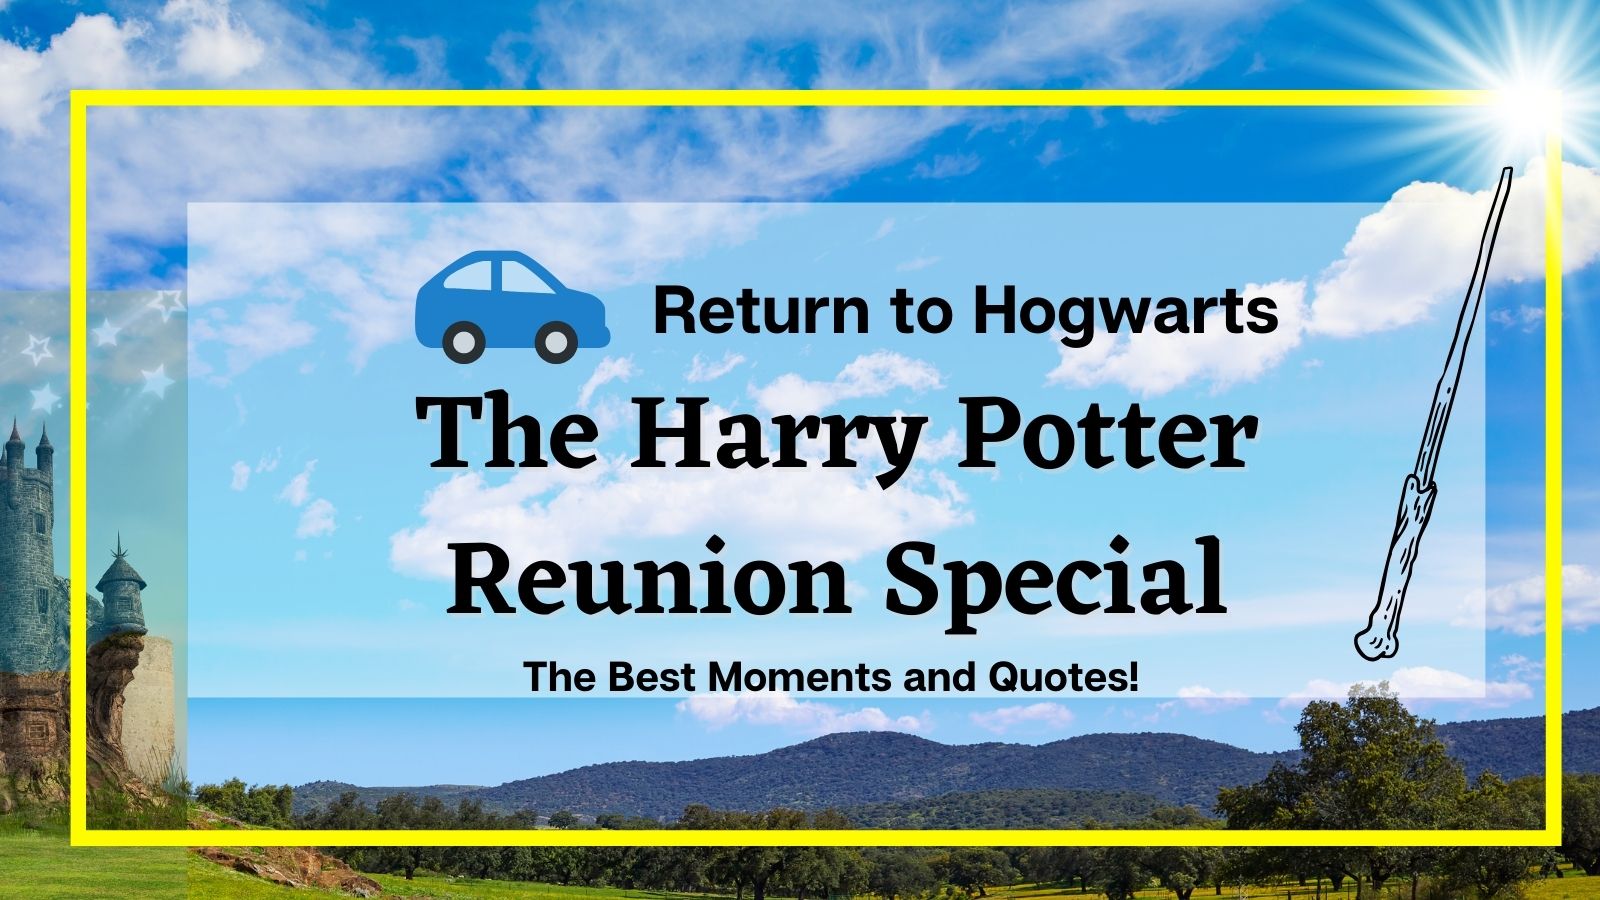 Harry Potter Reunion special quotes and moments from return to hogwarts